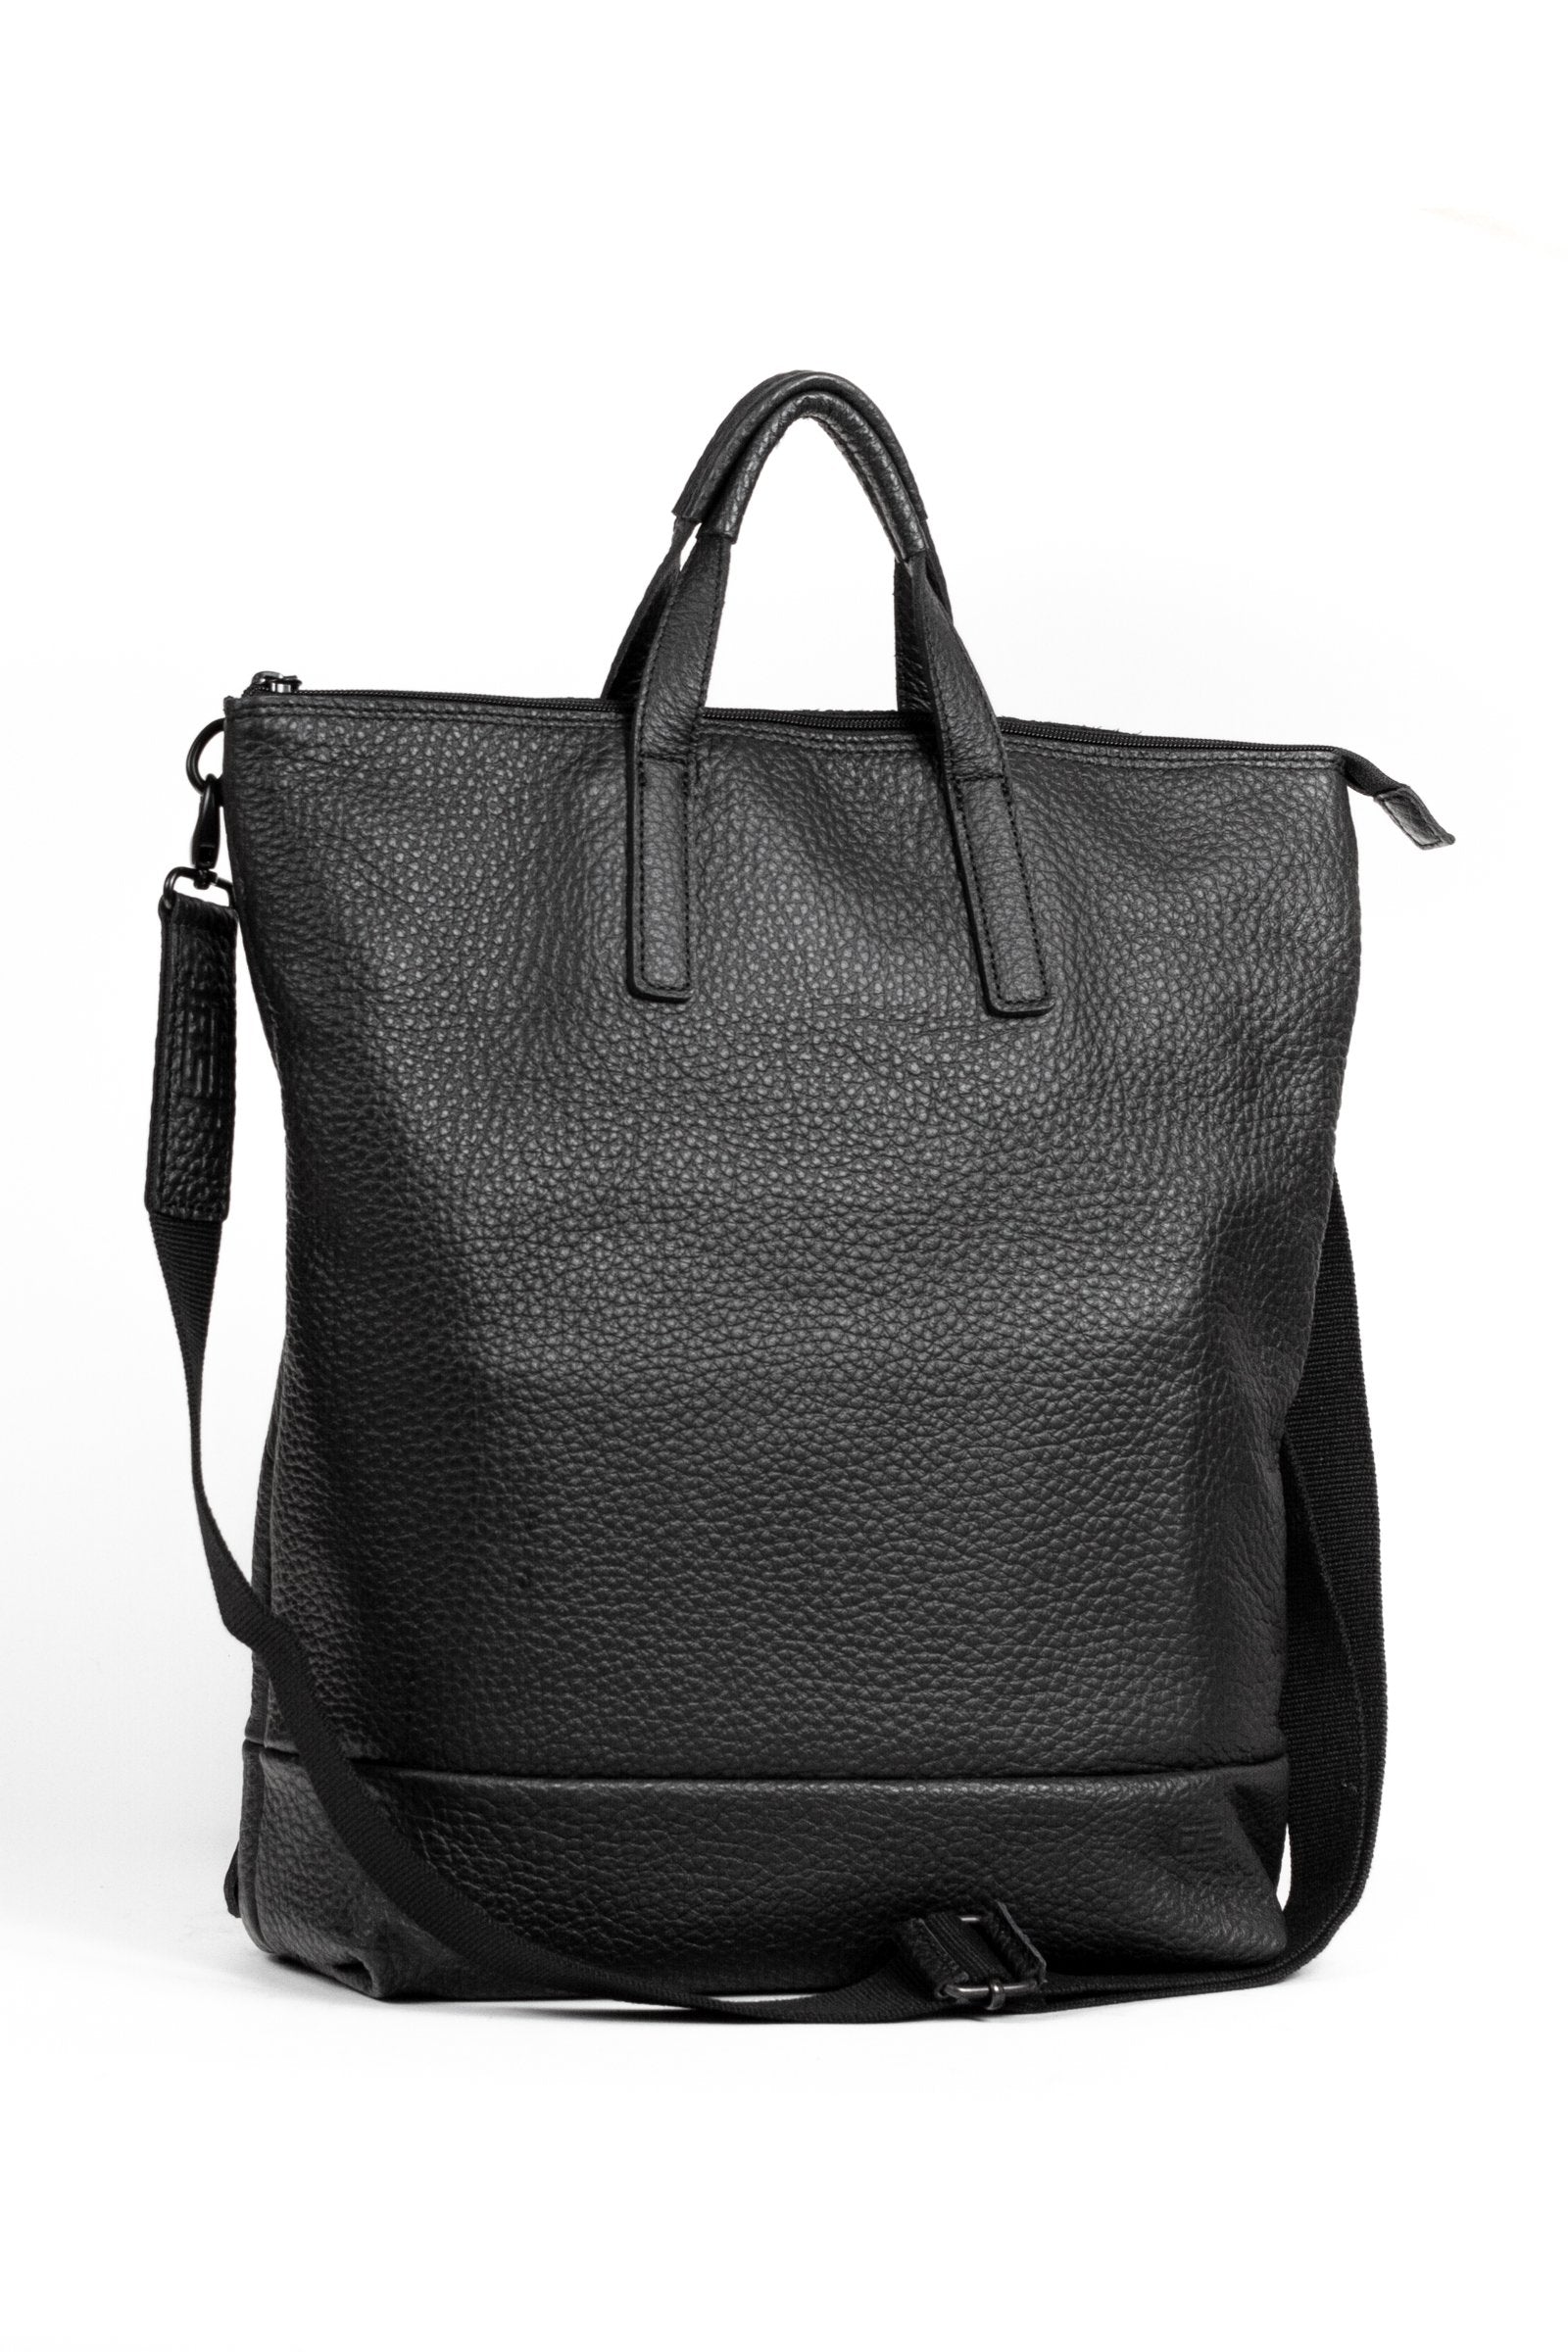 BEON.COM.AU The Jost Kopenhagen X-Change Small is a leather bag made in Europe from premium European leathers and fabrics. 3 in 1 bag that can be worn as a backpack, shoulder bag and handbag Made in coarsely milled cow hide Main compartment fits A4 documents, closes with zipper and carabiner Back zip pocket ... Jost at BEON.COM.AU